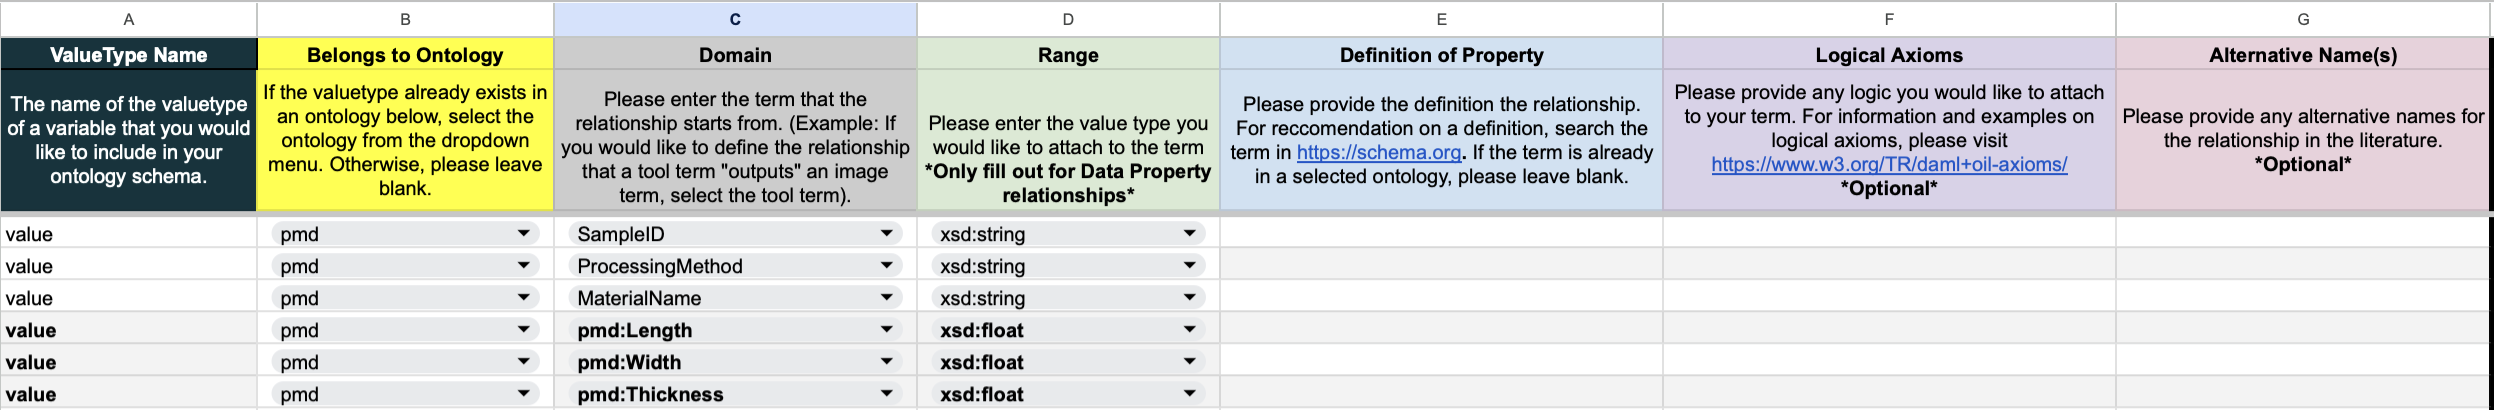 Value Type Definitions Sheet